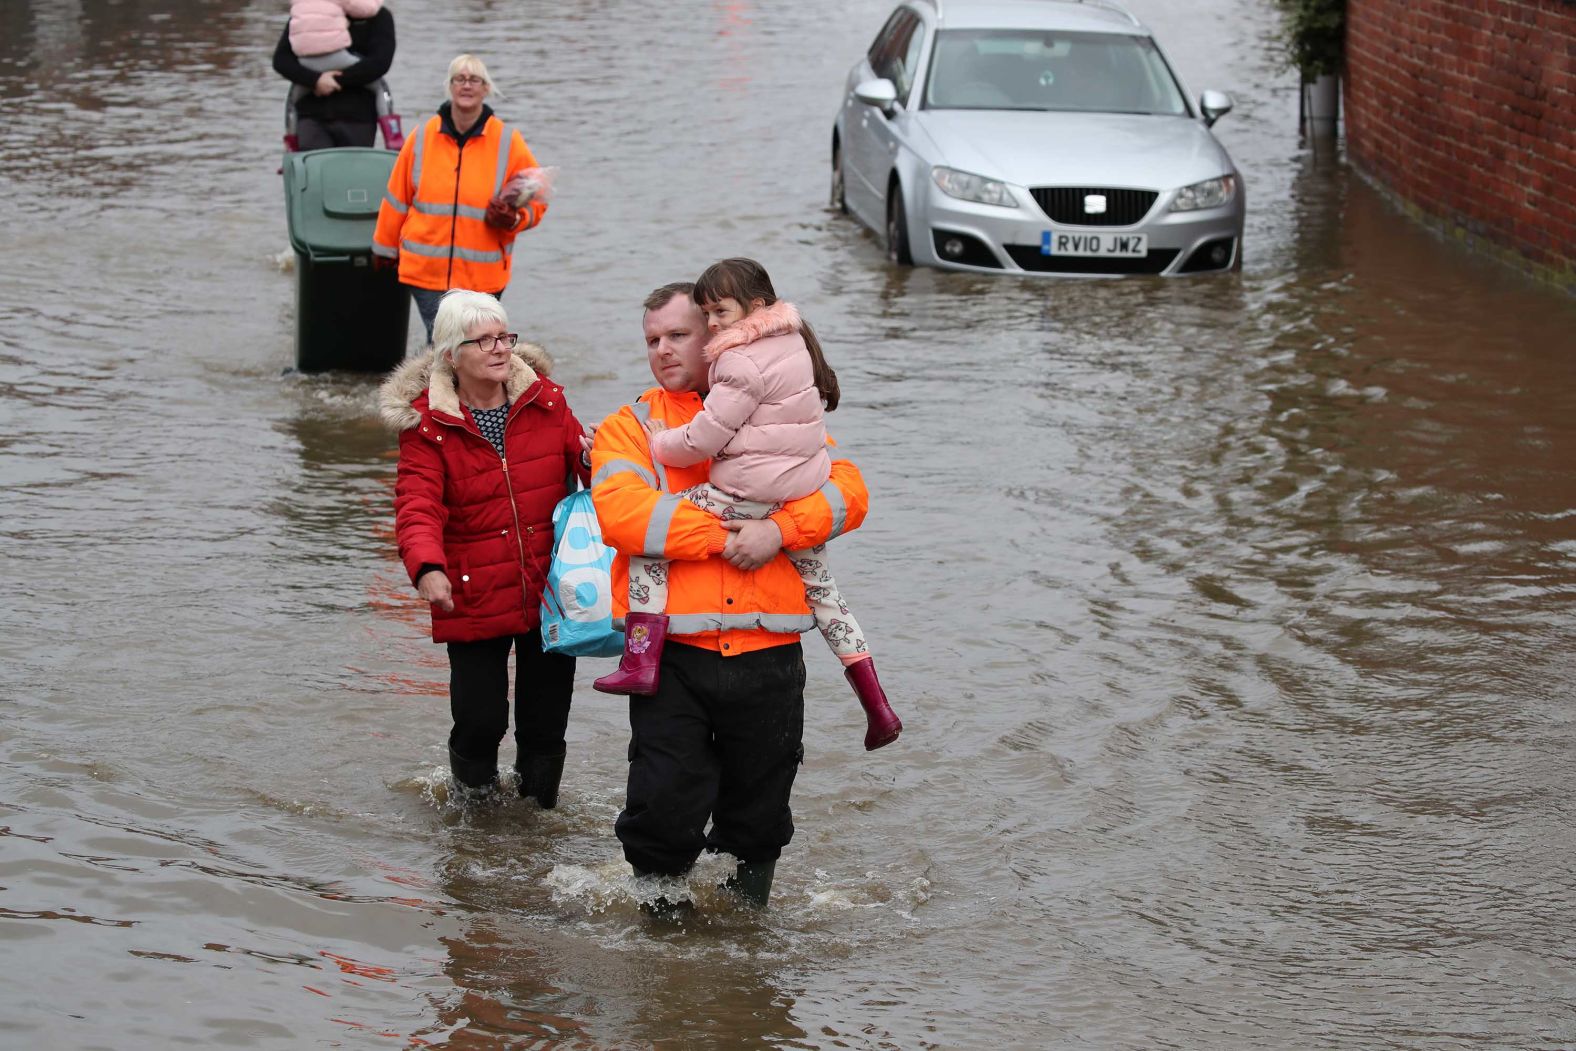 Andrew Hall carries his 6-year-old daughter Lillie-Mai through floodwater in Doncaster.